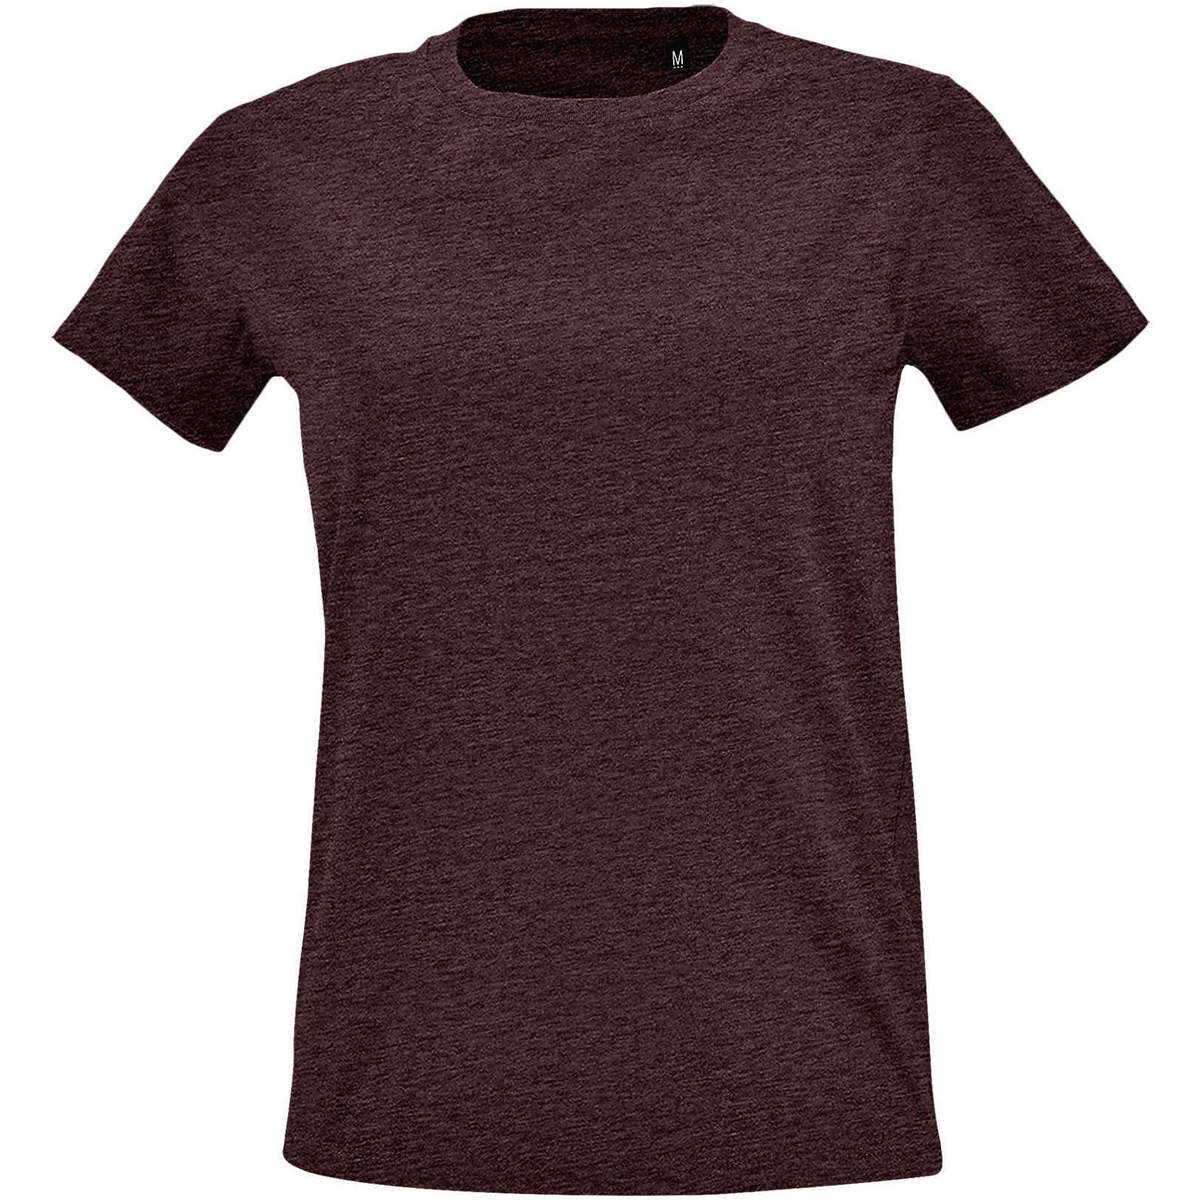 Kleidung Damen T-Shirts Sols Camiseta IMPERIAL FIT color Oxblood Other